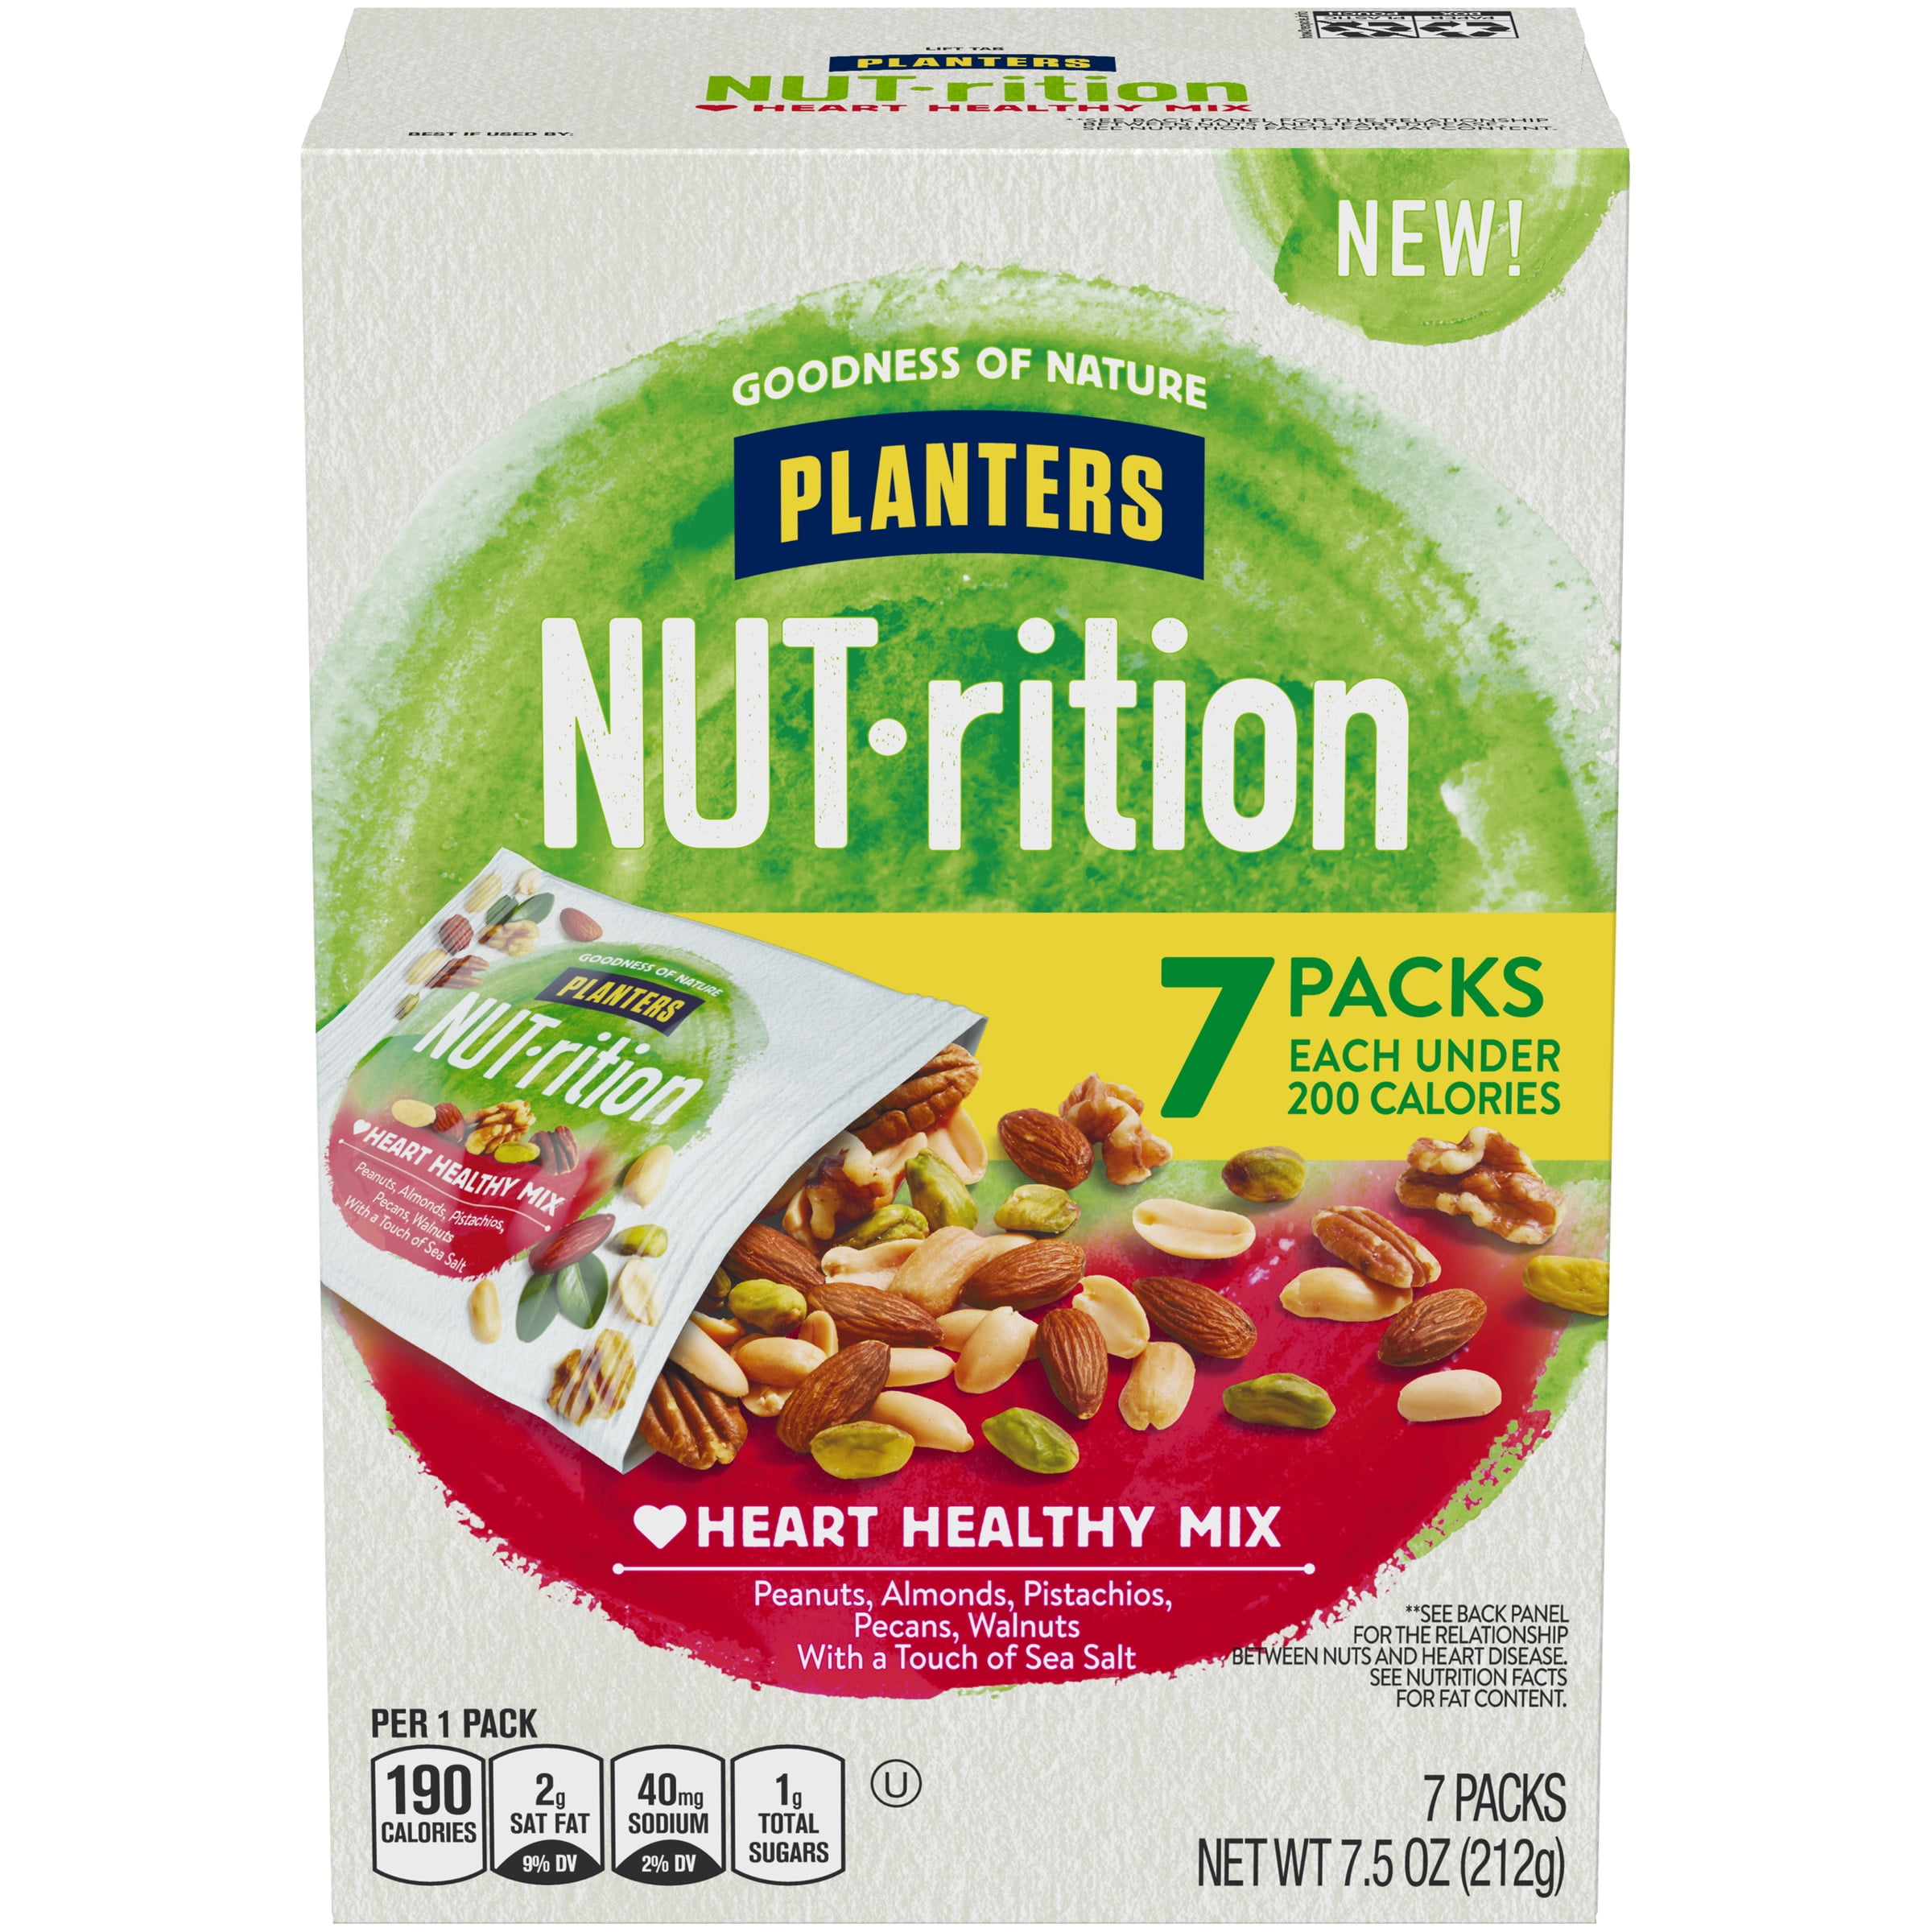 NUT-rition Heart Healthy Mix with Peanuts, Almonds, Pistachios, Pecans, Walnuts & Sea Salt, 7 ct Packs